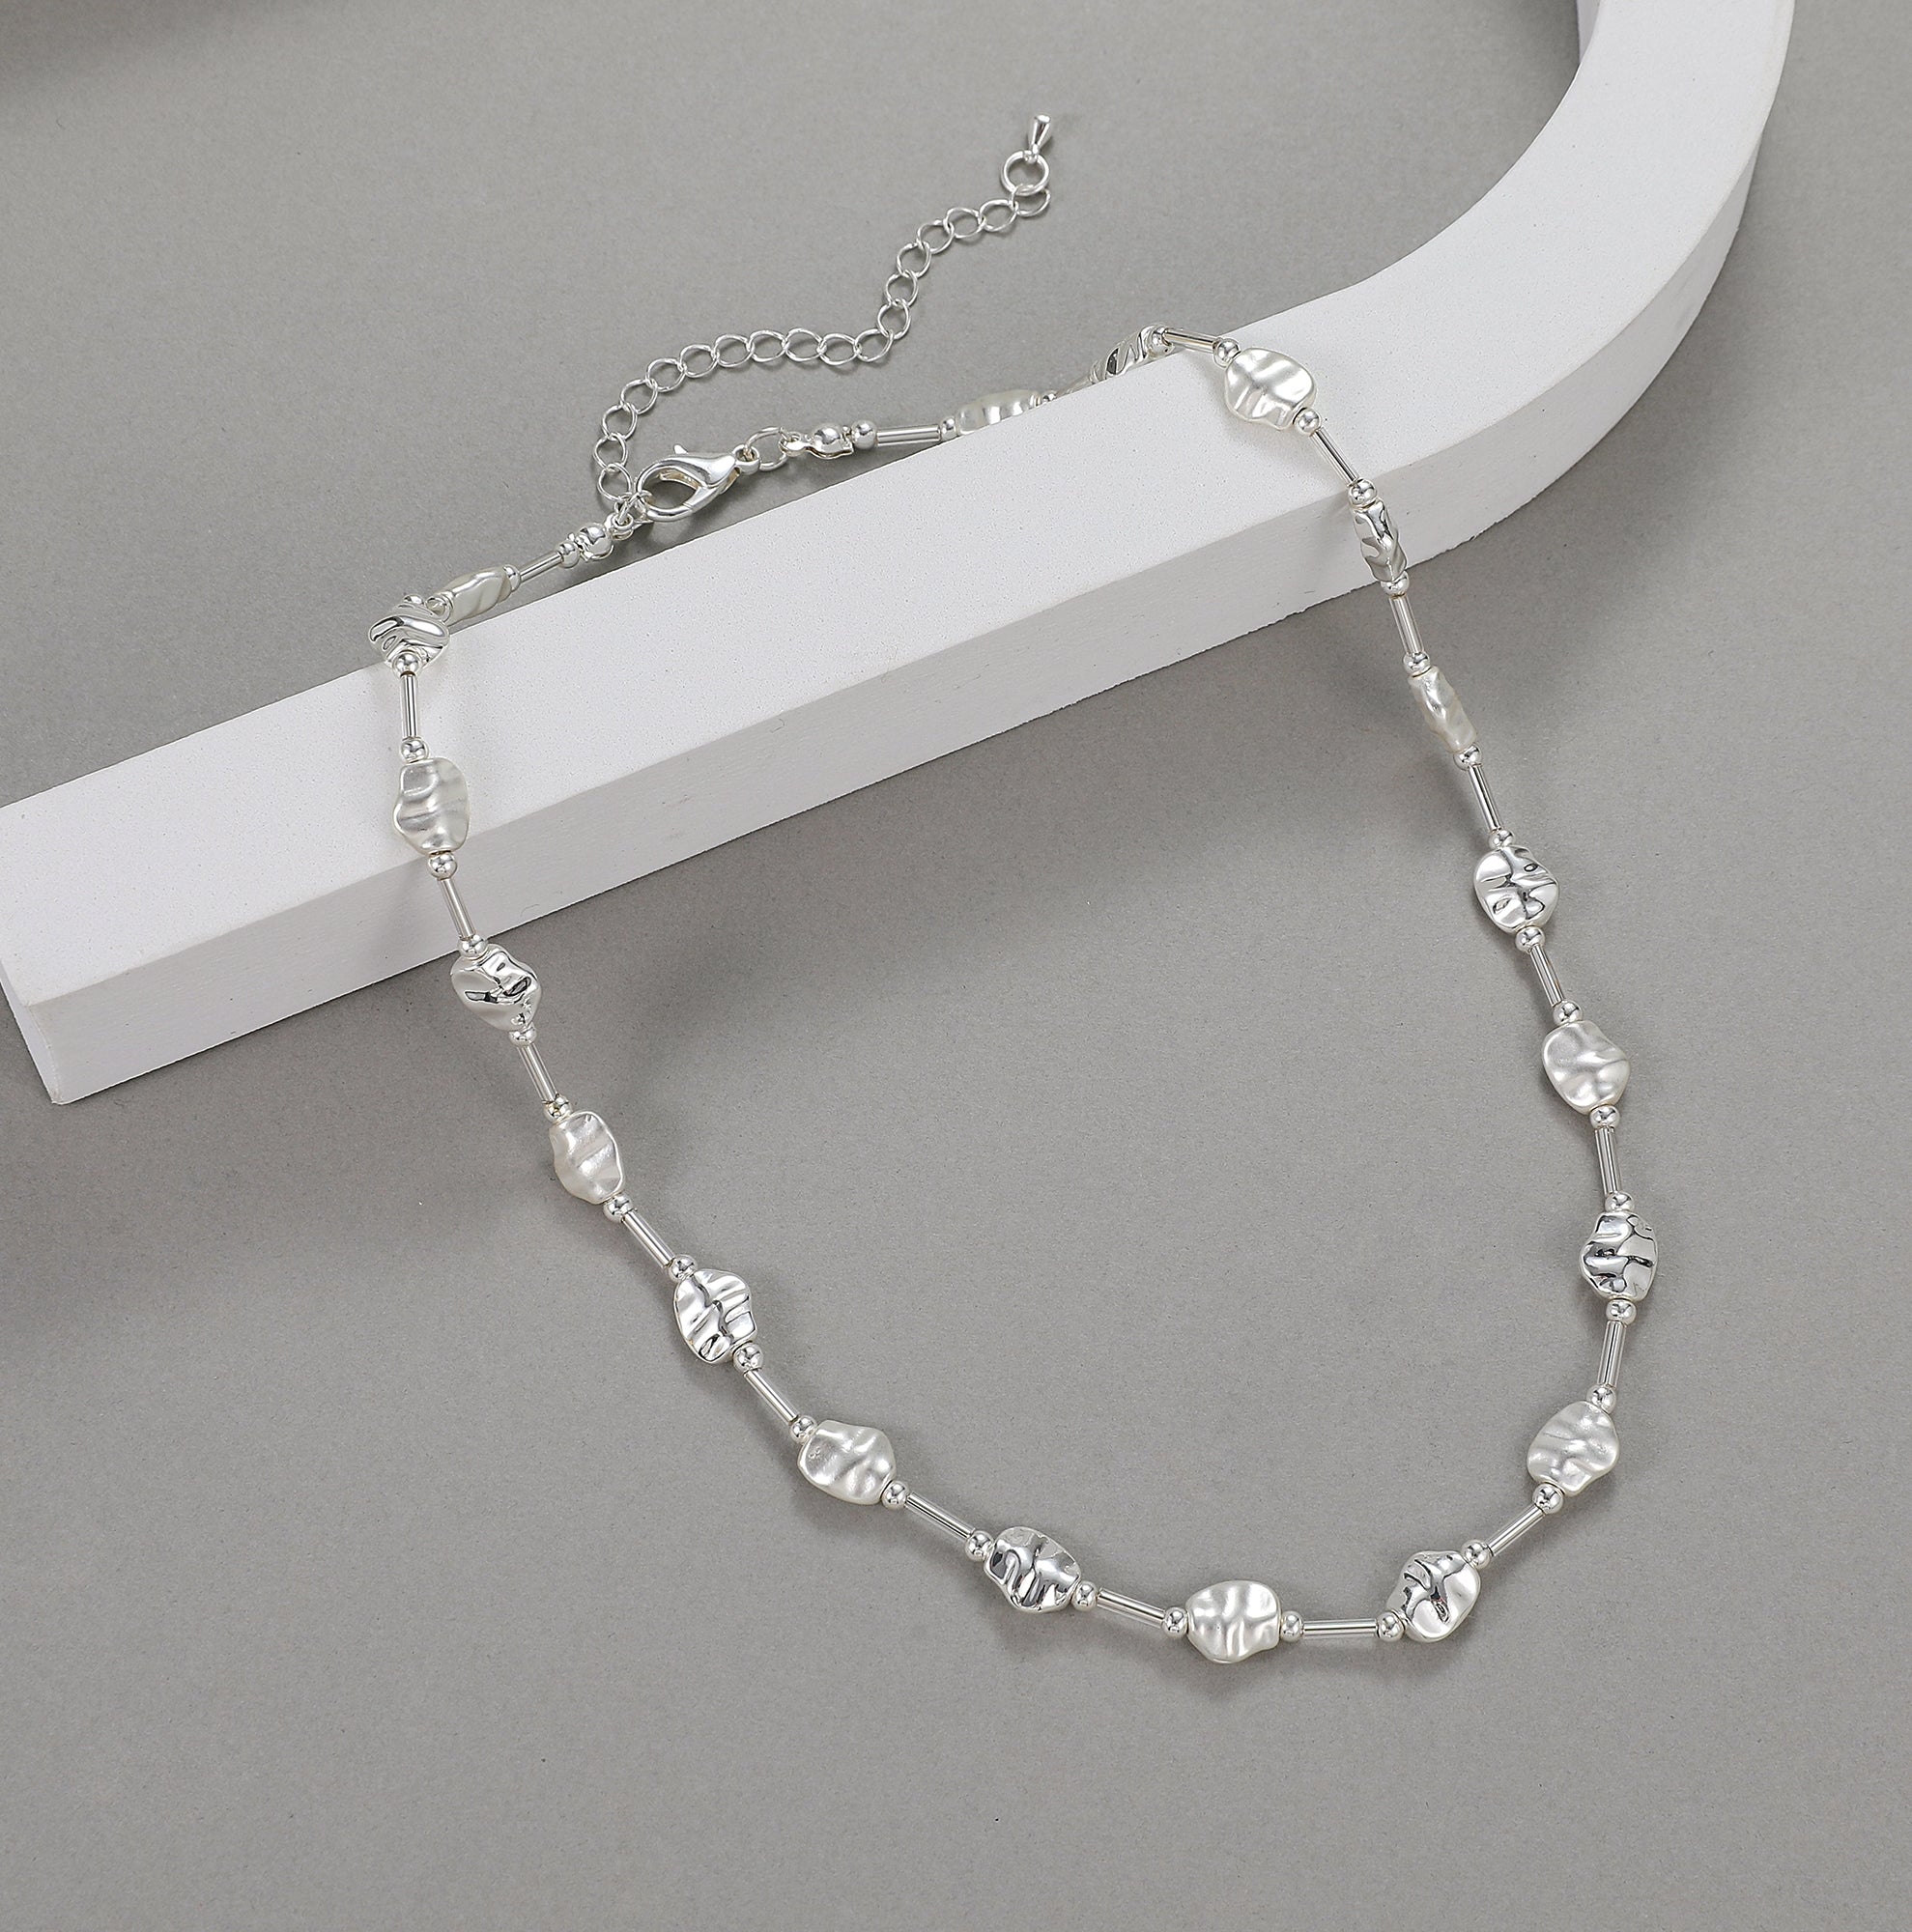 Short necklace with matte silver and shiny silver battered circular stations